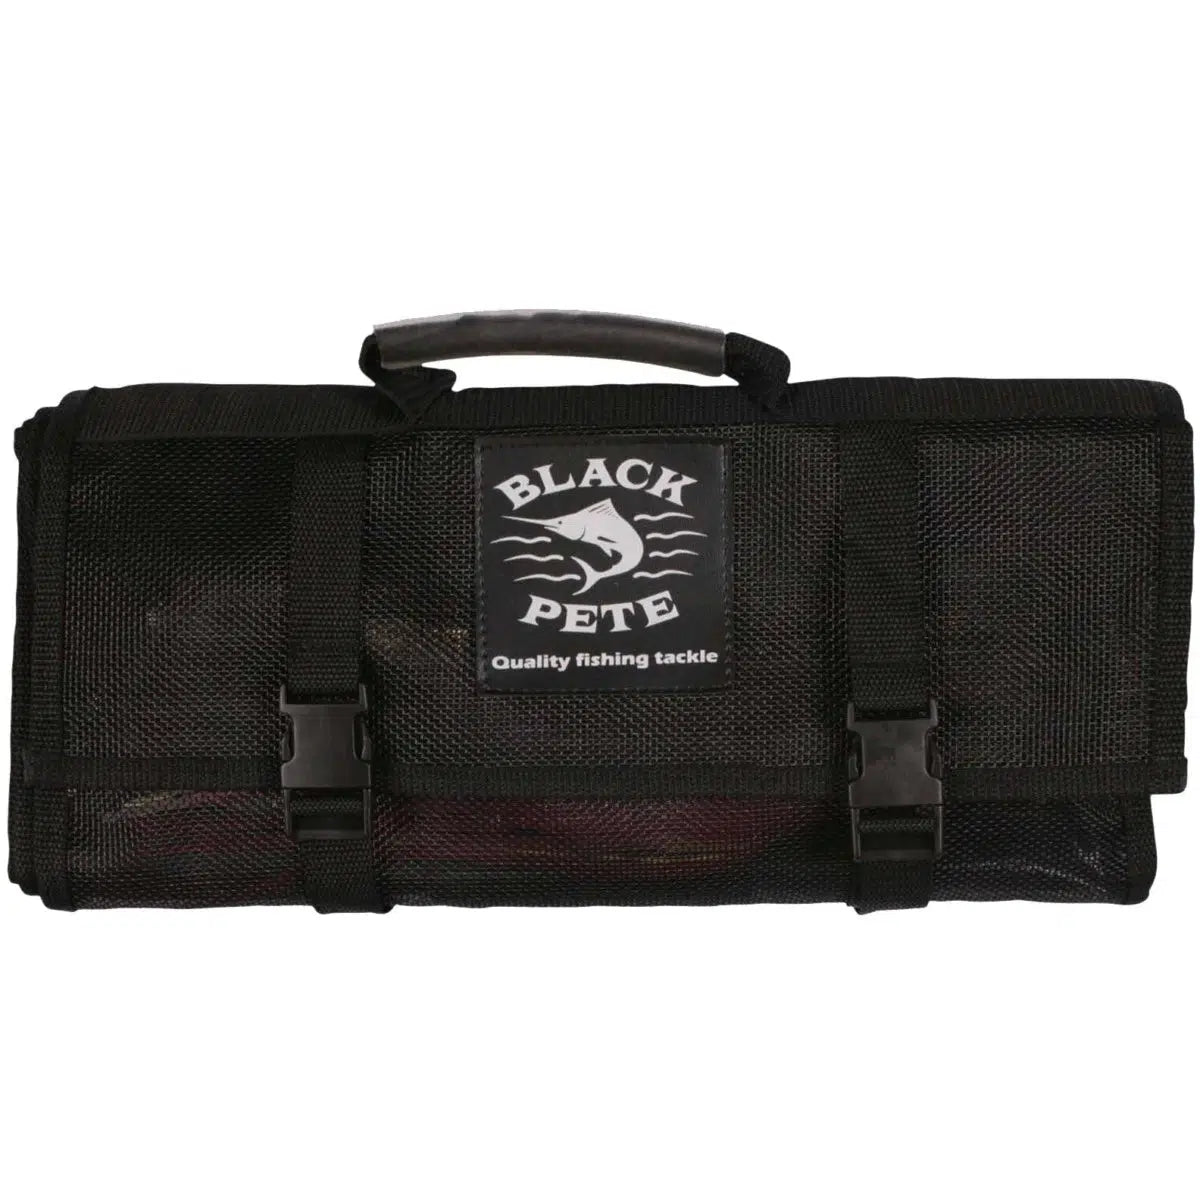 Black Pete Lure Pouch-Tackle Boxes & Bags - Lure Wraps-Black Pete-Extra Large 6 pocket-Fishing Station